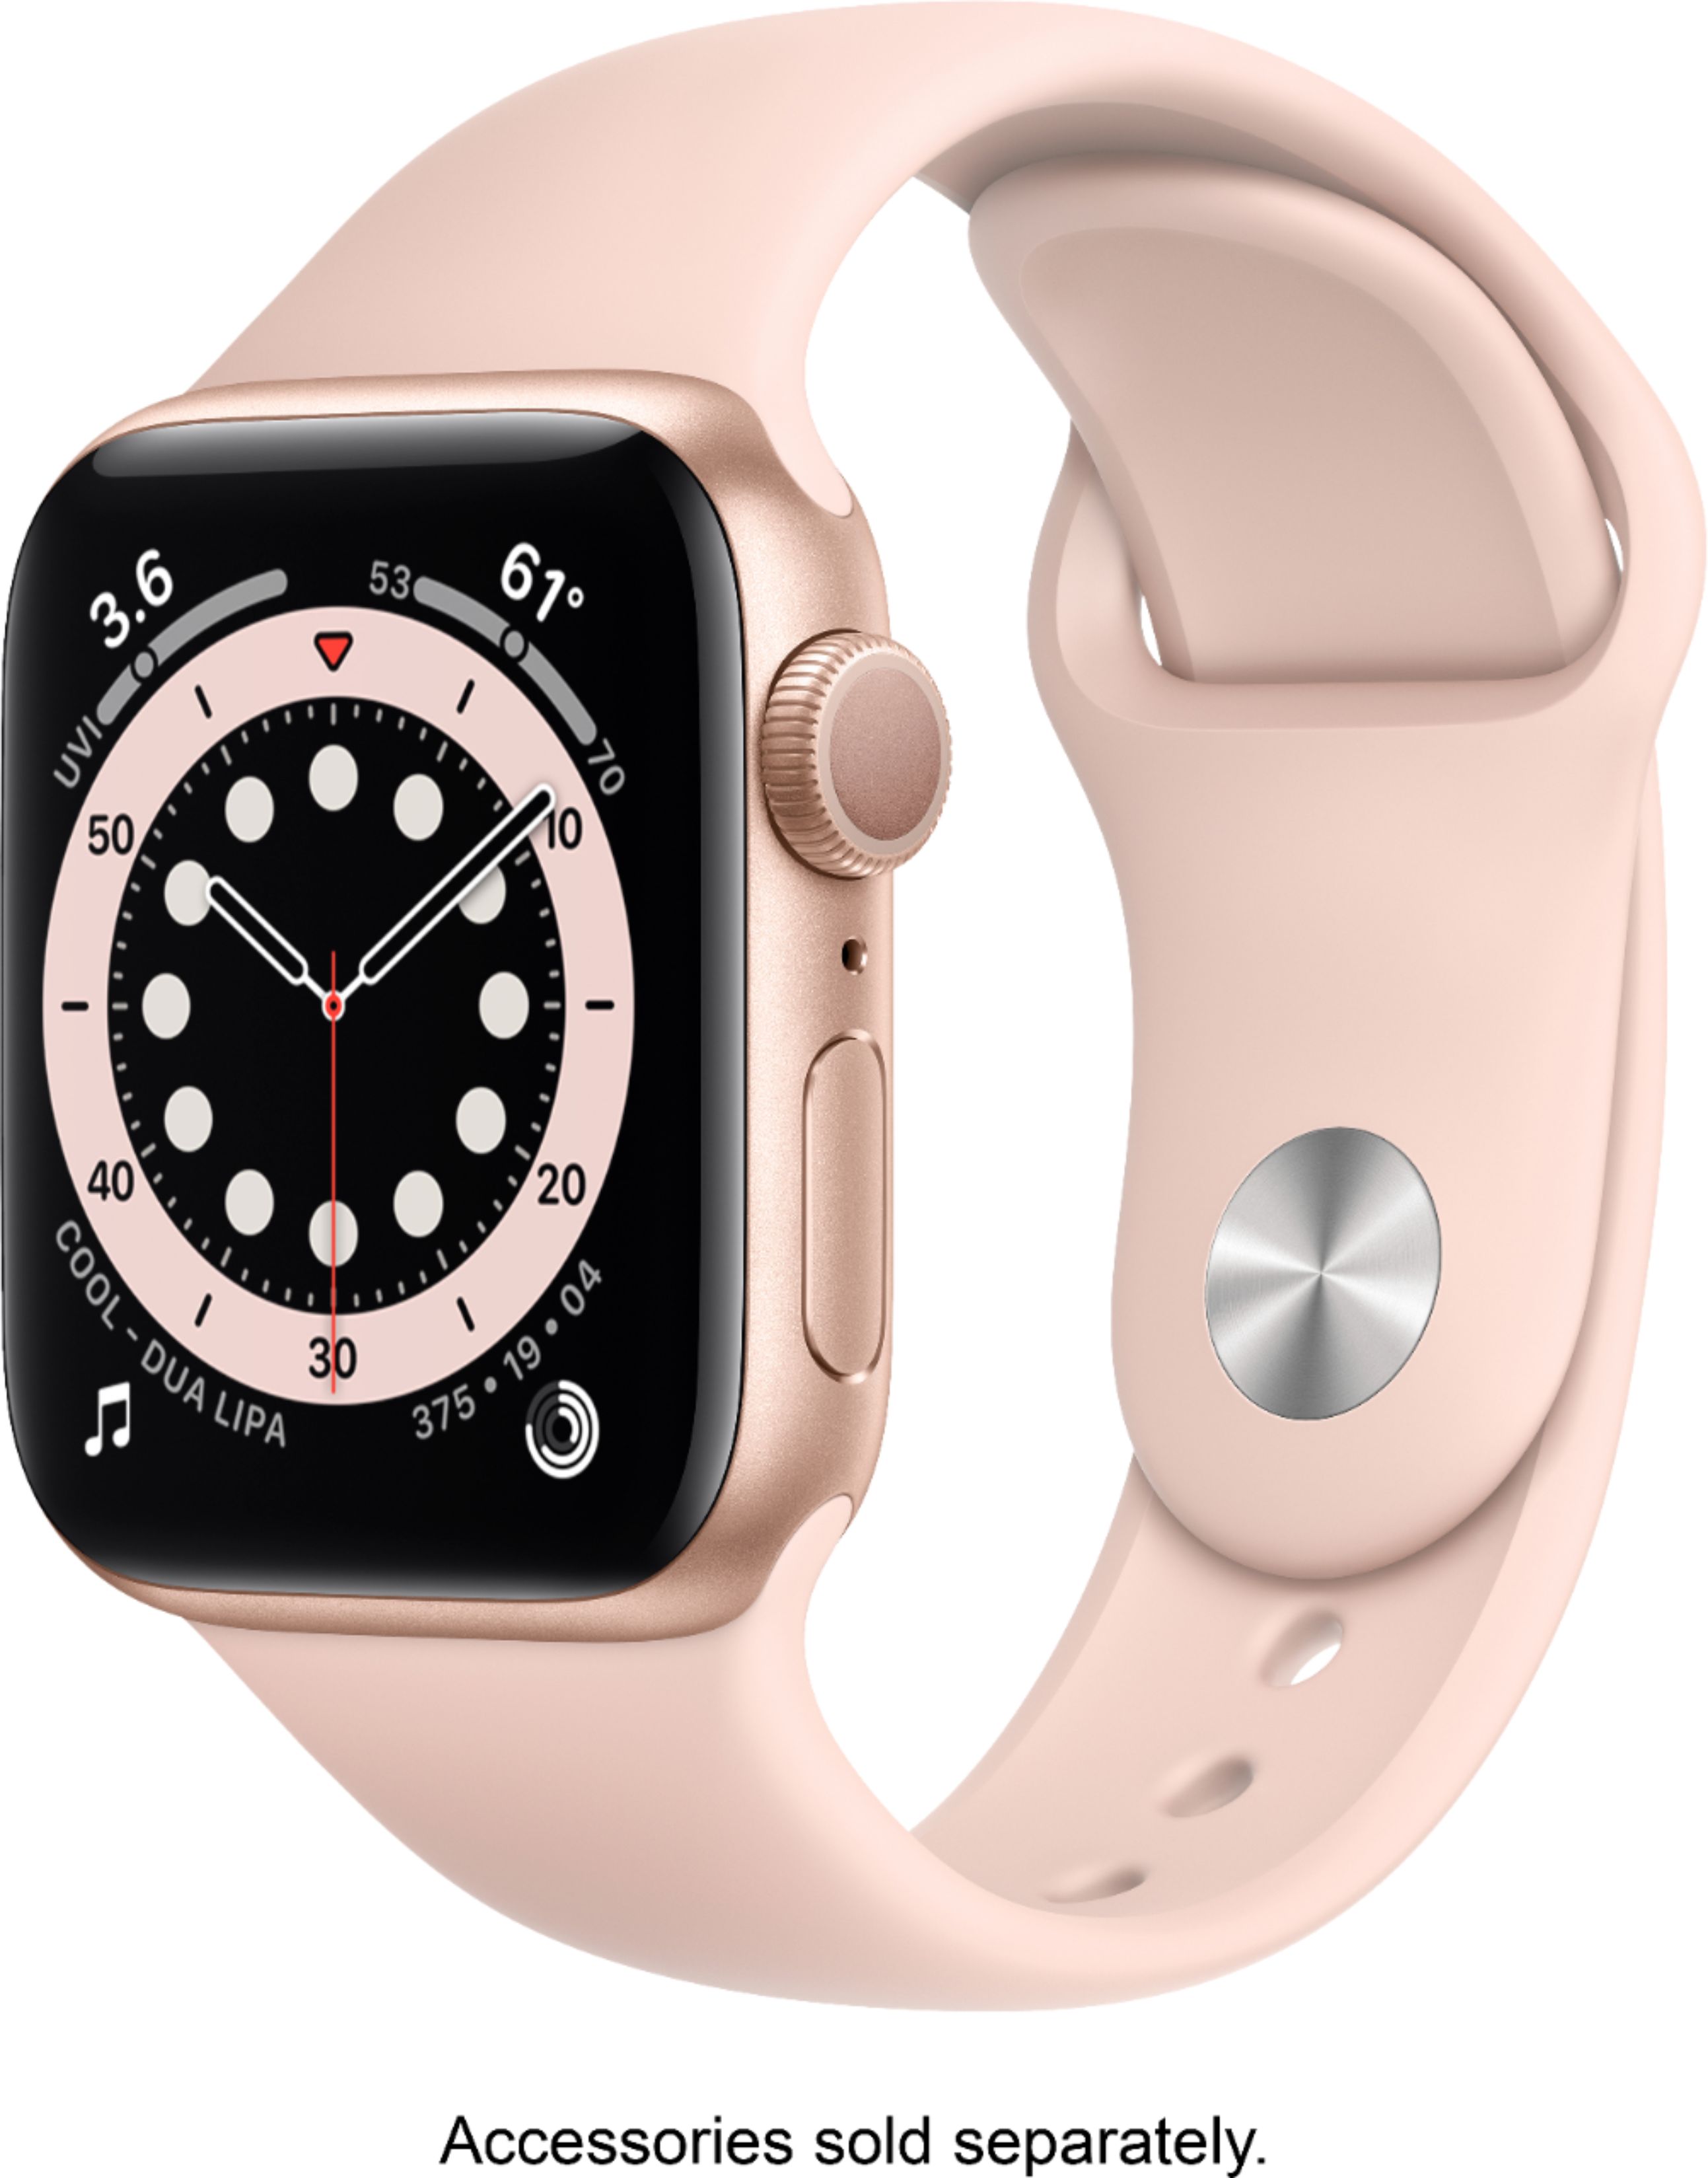 Apple Watch Series 6 (GPS) 40mm Gold Aluminum Case with Pink Sand Sport Band - Gold